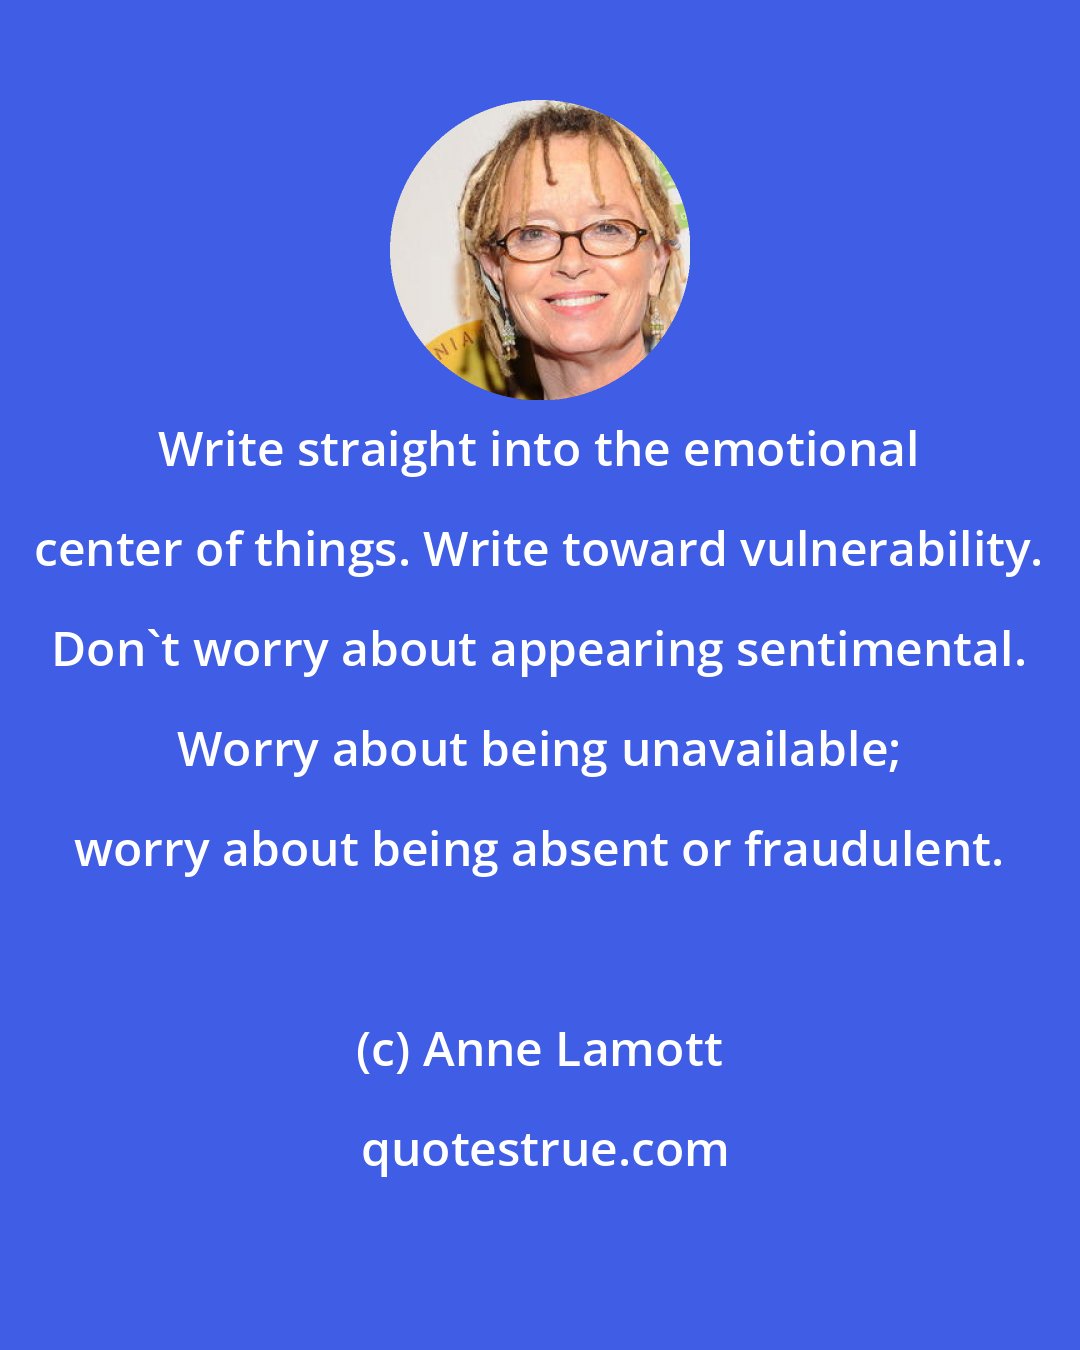 Anne Lamott: Write straight into the emotional center of things. Write toward vulnerability. Don't worry about appearing sentimental. Worry about being unavailable; worry about being absent or fraudulent.